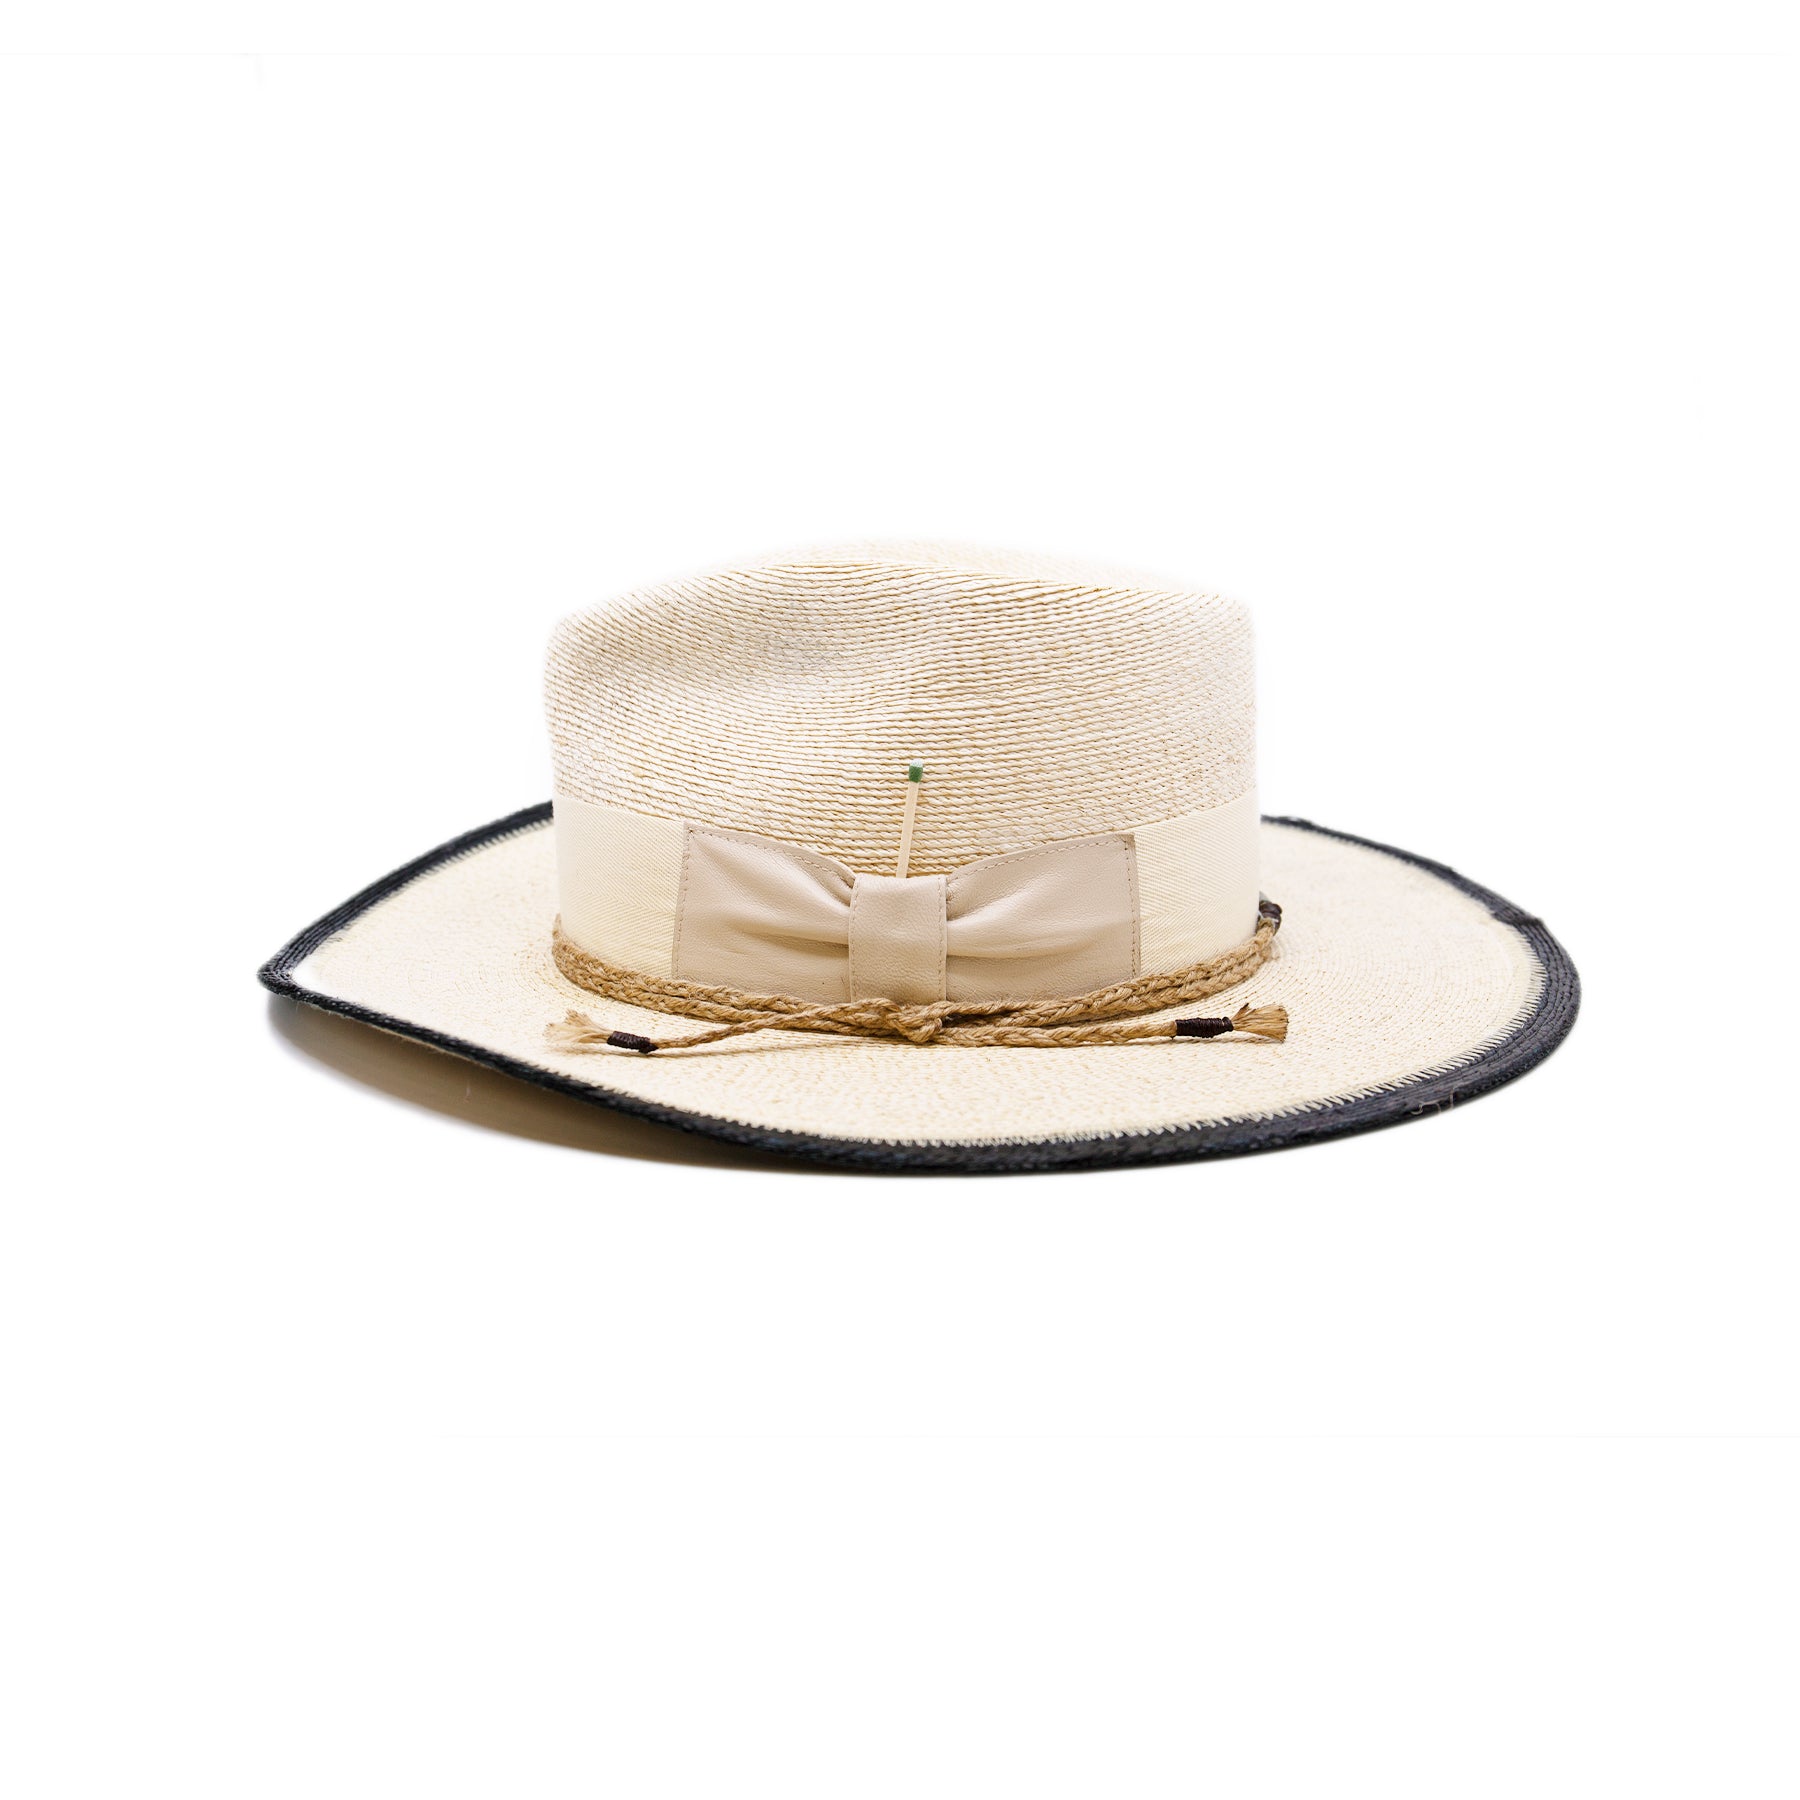 100% Mexican straw in Cream and Black  2" cream herringbone band and leather bow  Wrapped twine band  3 1/2"  Two-tone brim  Woven in Mexico  Subtle western flanged brim  Made in USA